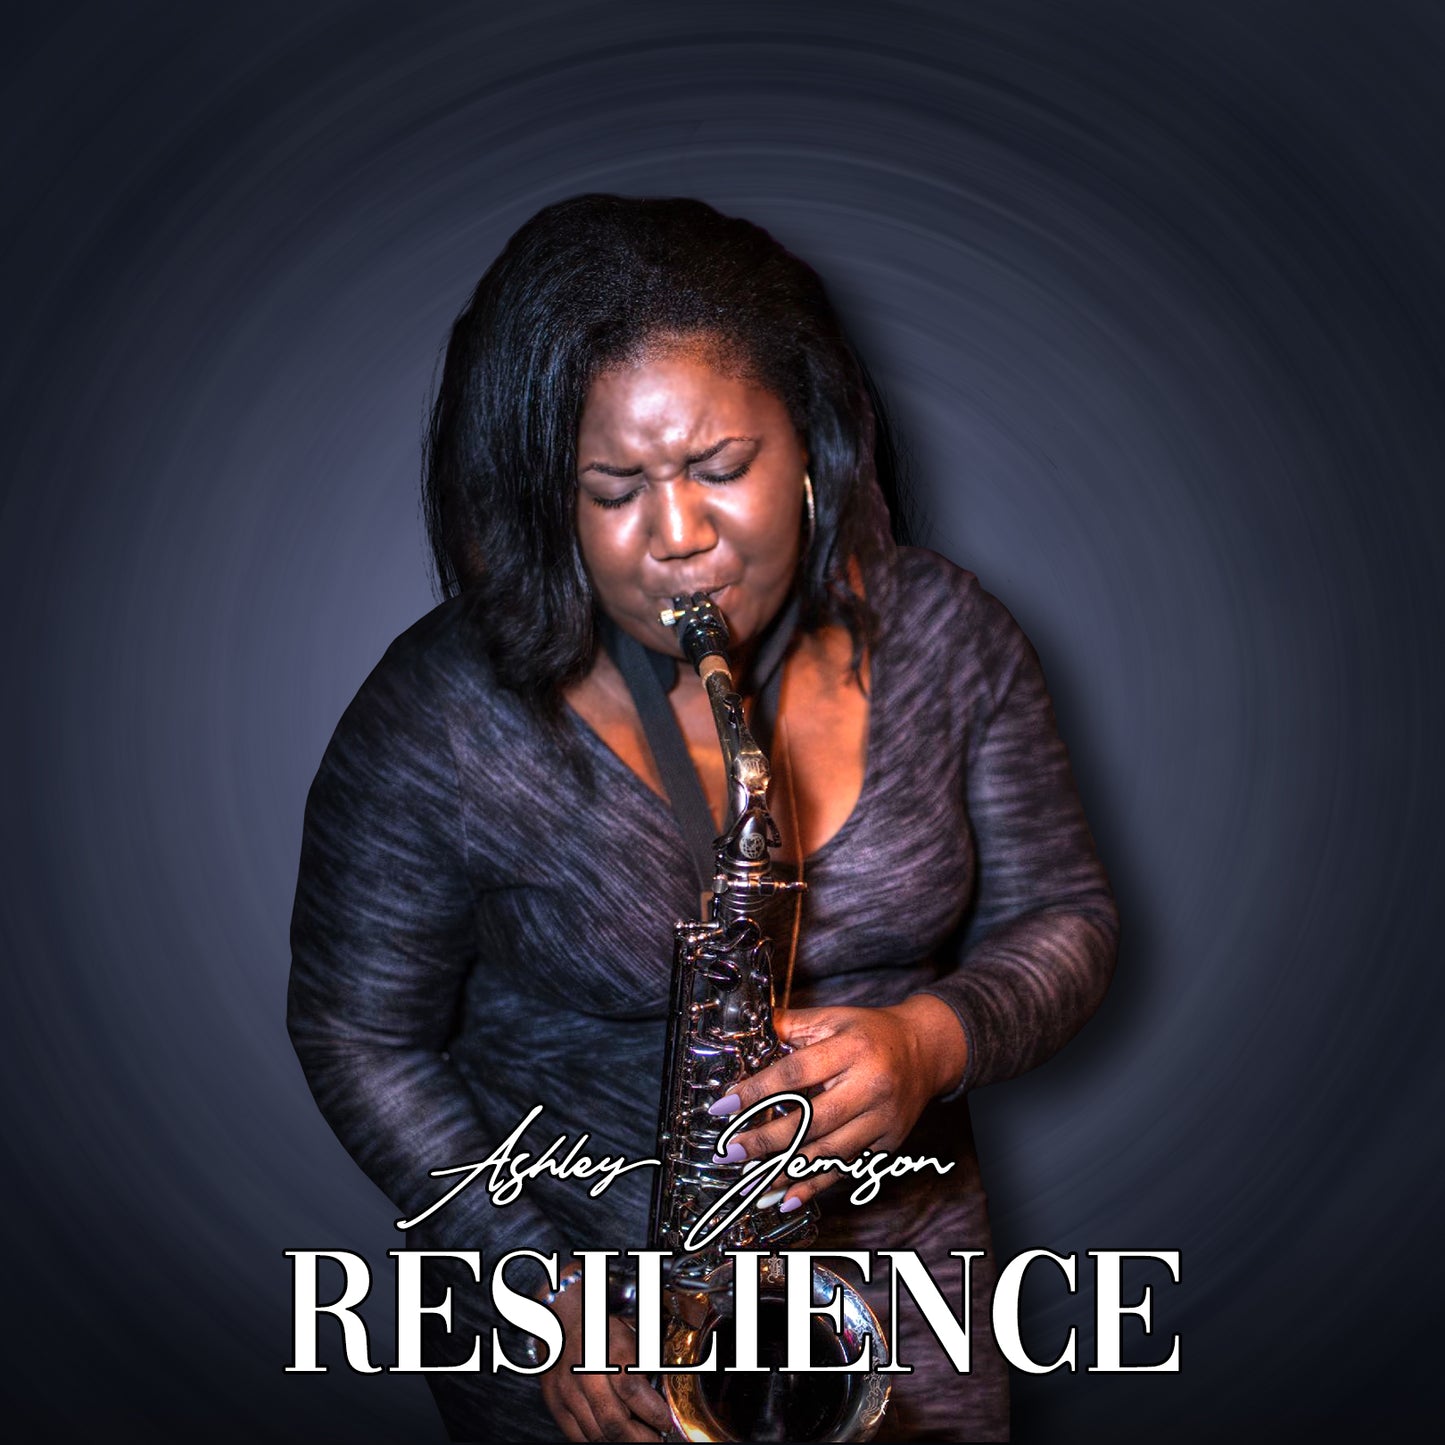 Resilience EP - Autographed CD